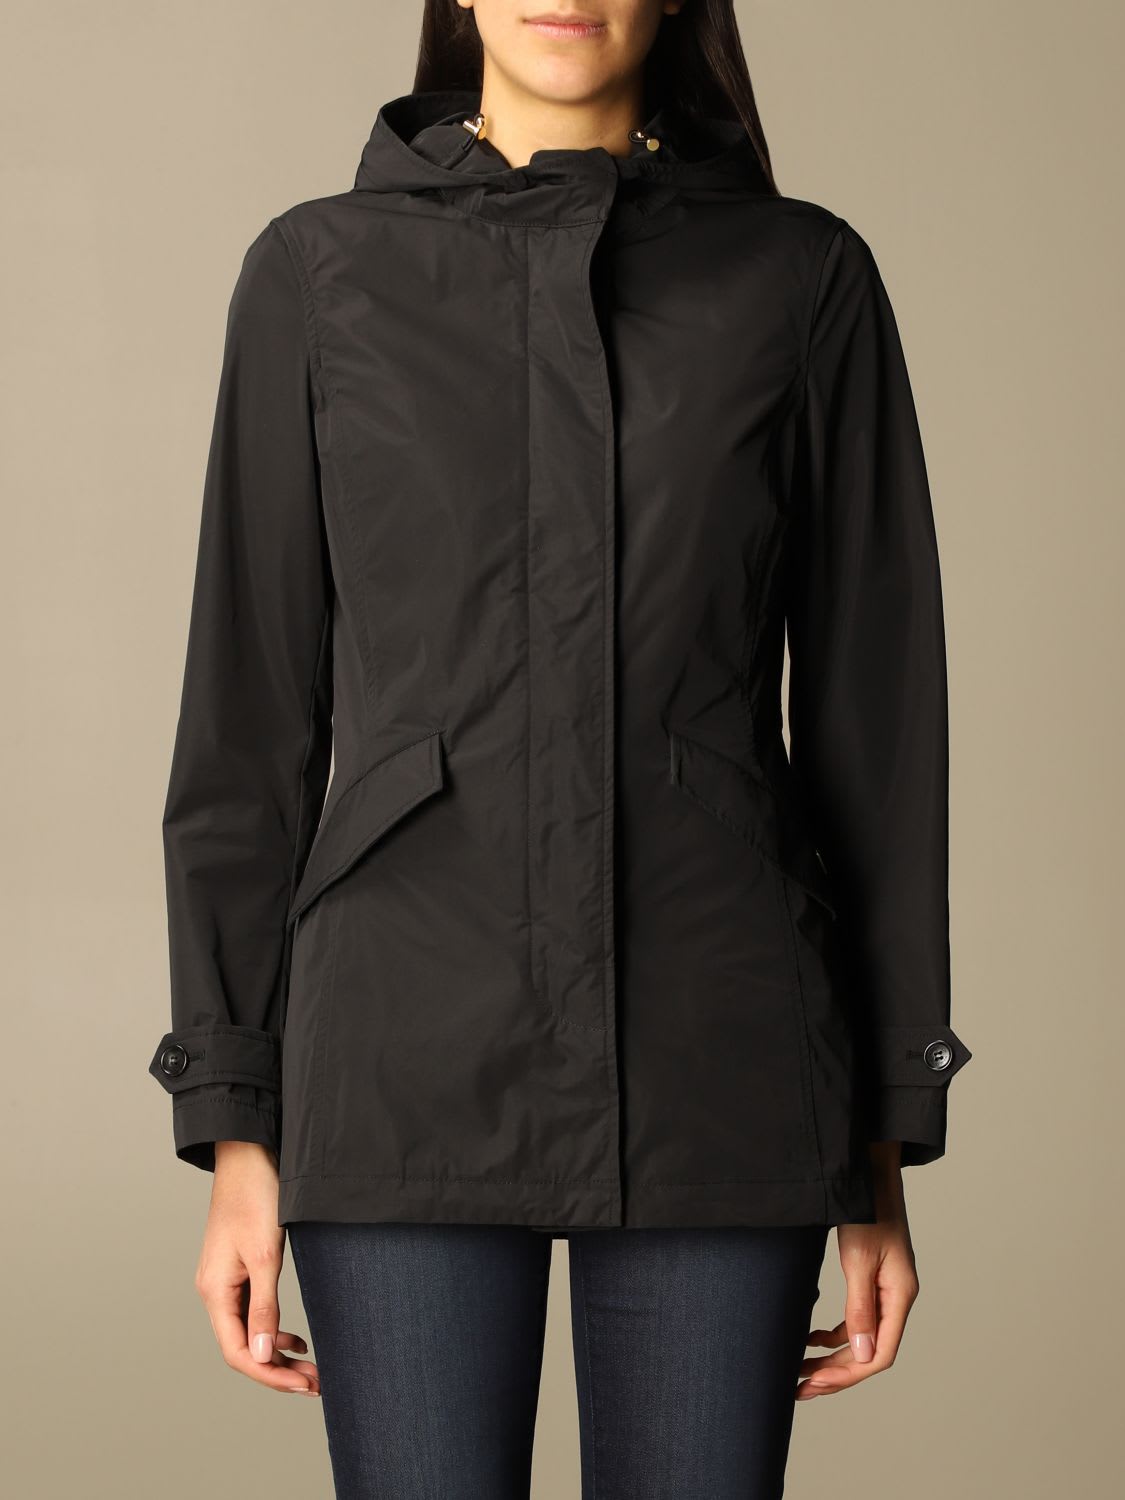 Woolrich Jacket In Technical Fabric In Black